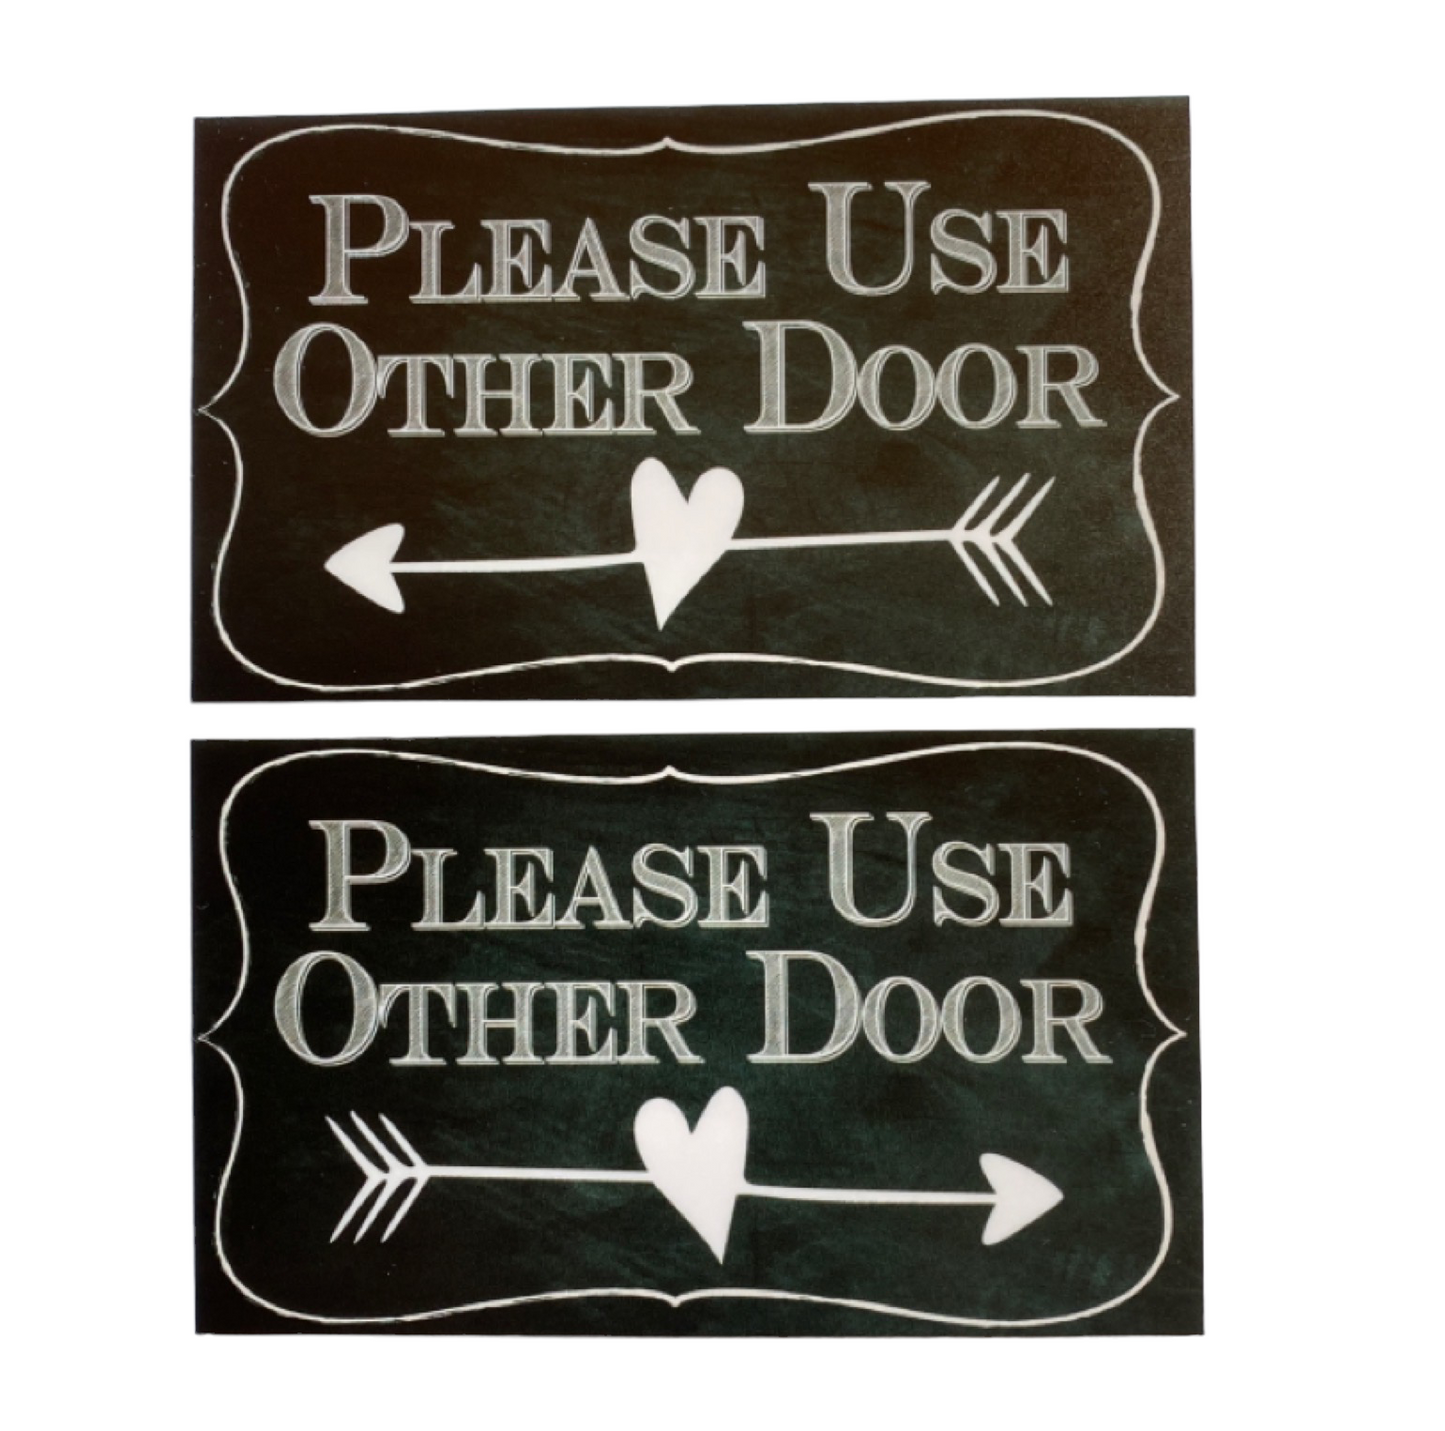 Please Use Other Door Vintage Arrow Sign - The Renmy Store Homewares & Gifts 